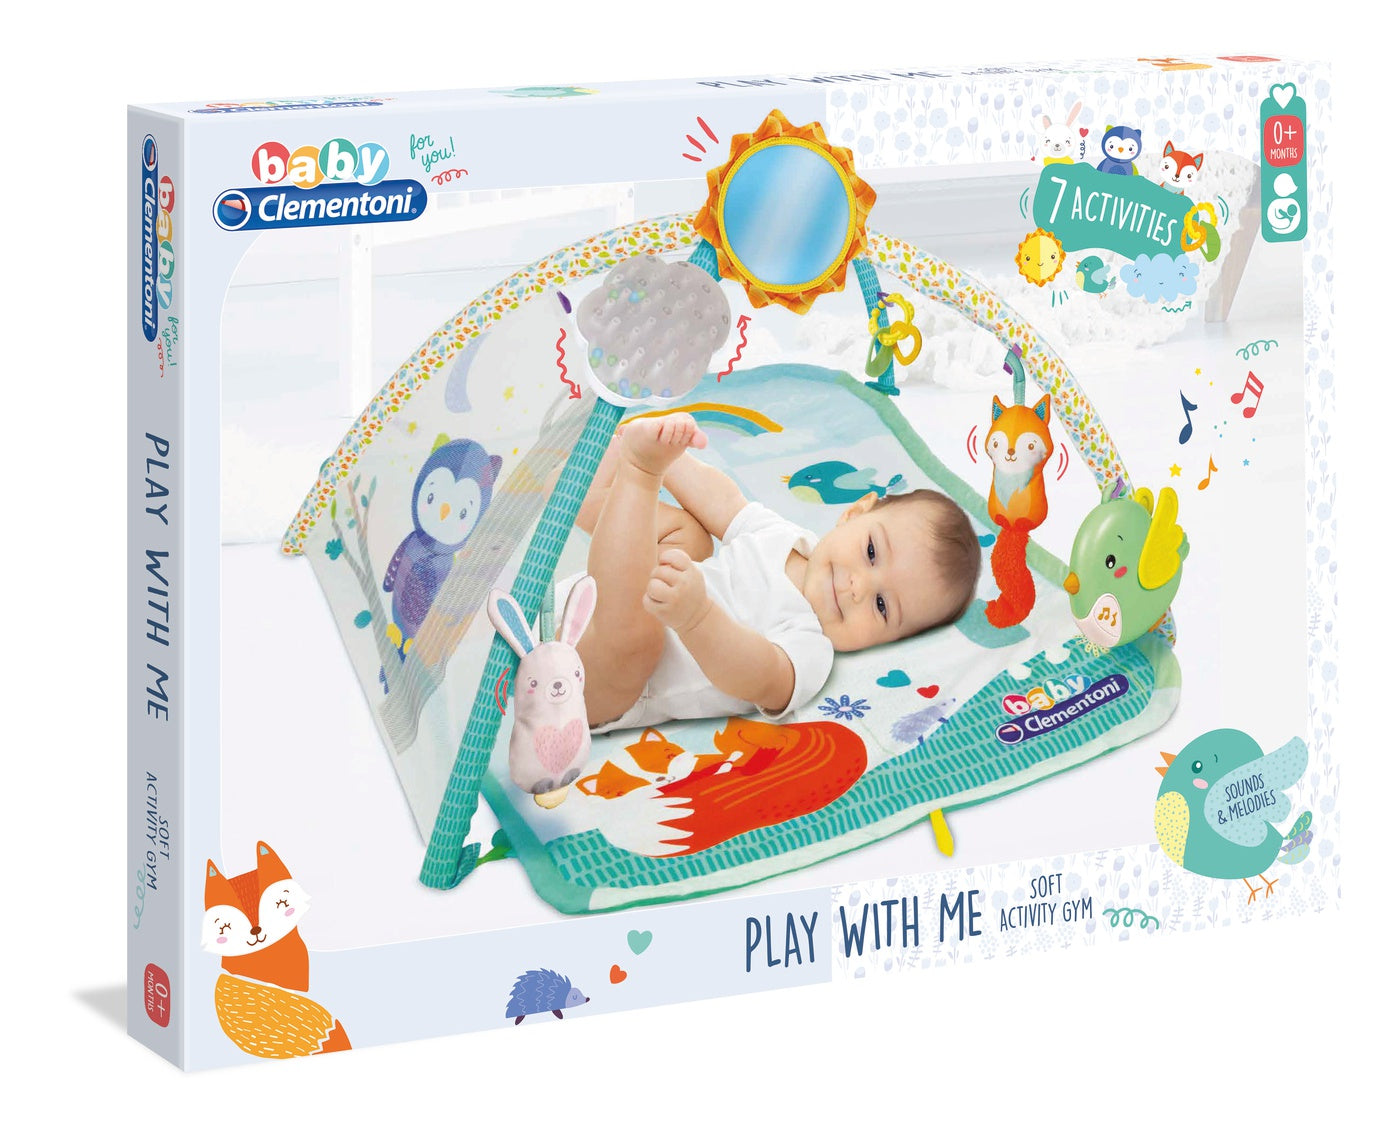 Baby Clementoni Play with Me Soft Activity Gym